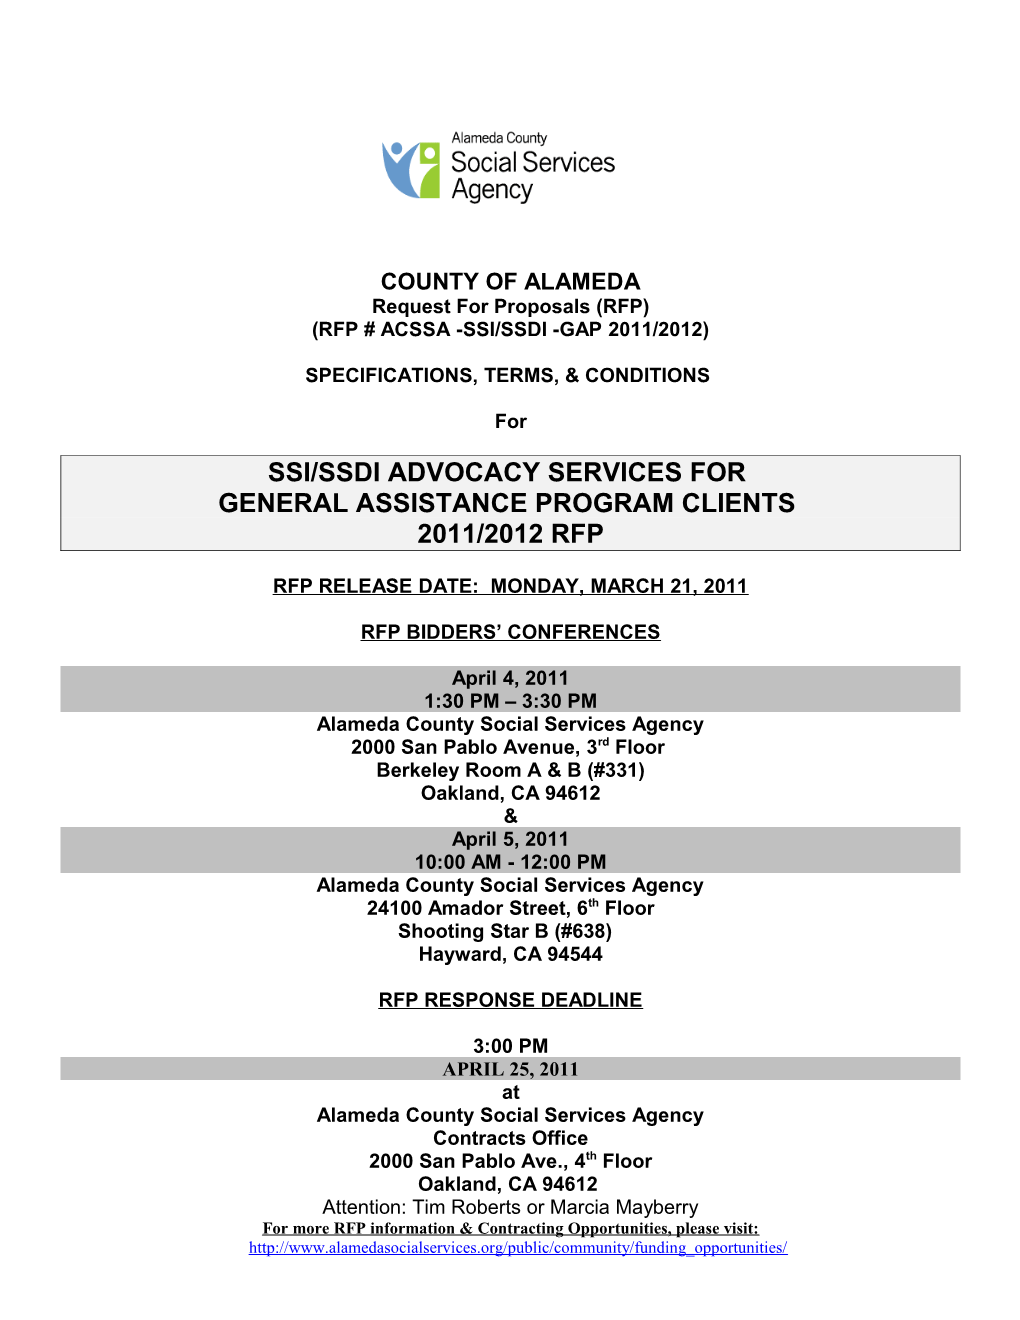 Ssi/Ssdi Advocacy Services for General Assistance Program Clients 2011/2012 Rfp